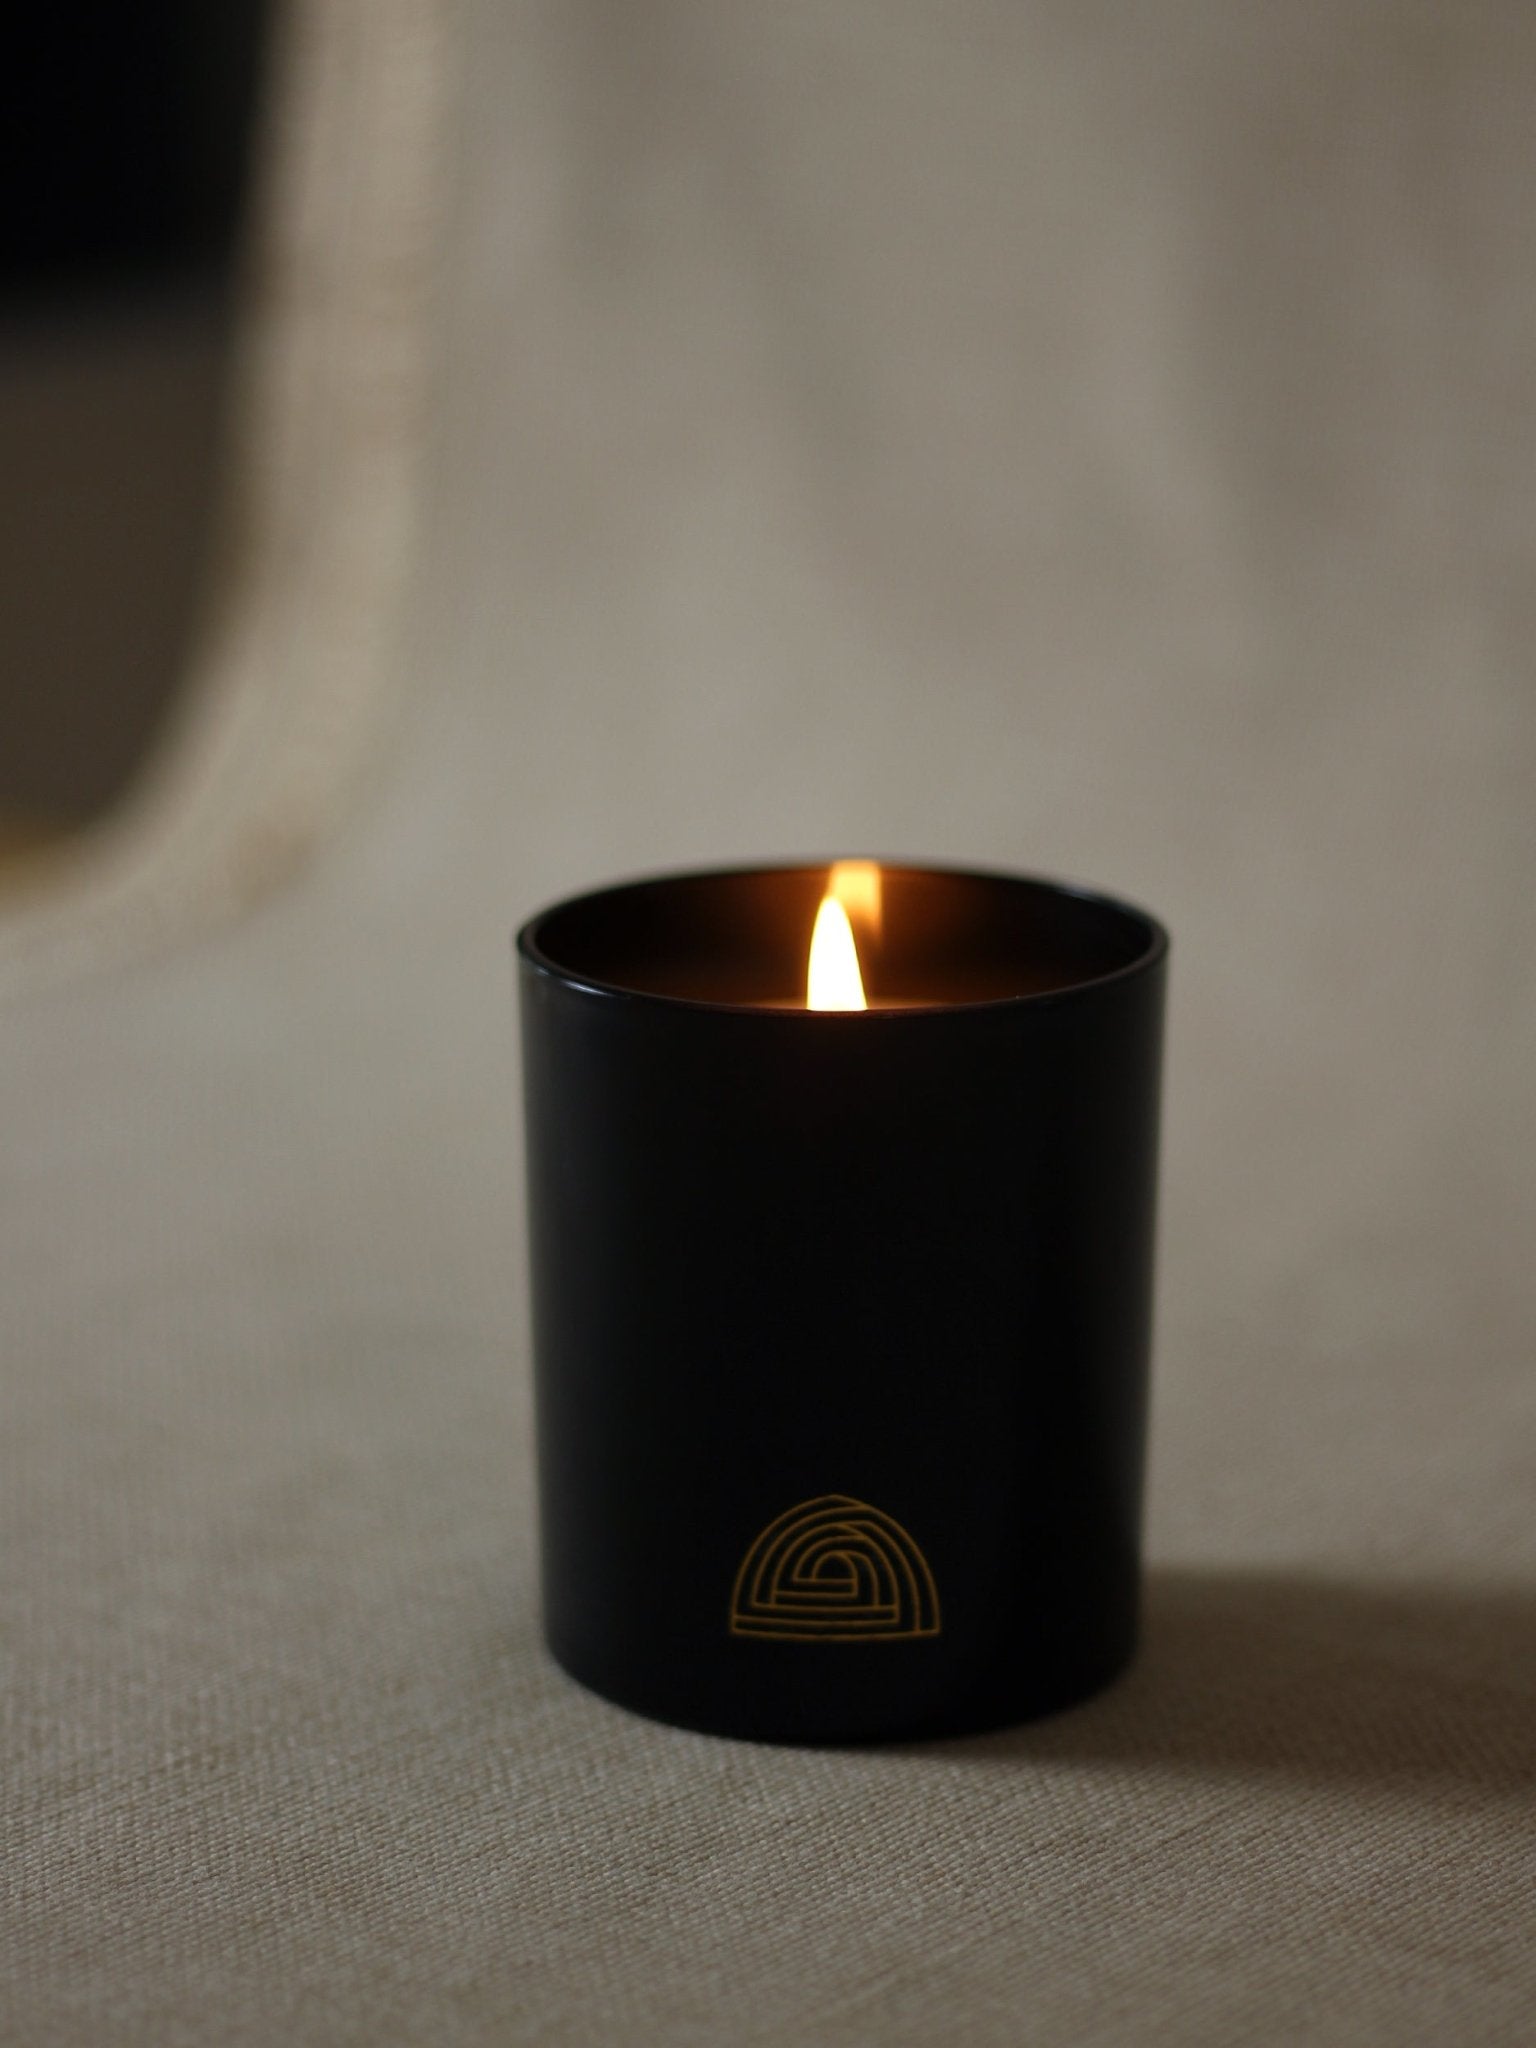 Wholesale beeswax candle wick For Subtle Scents And Fragrances